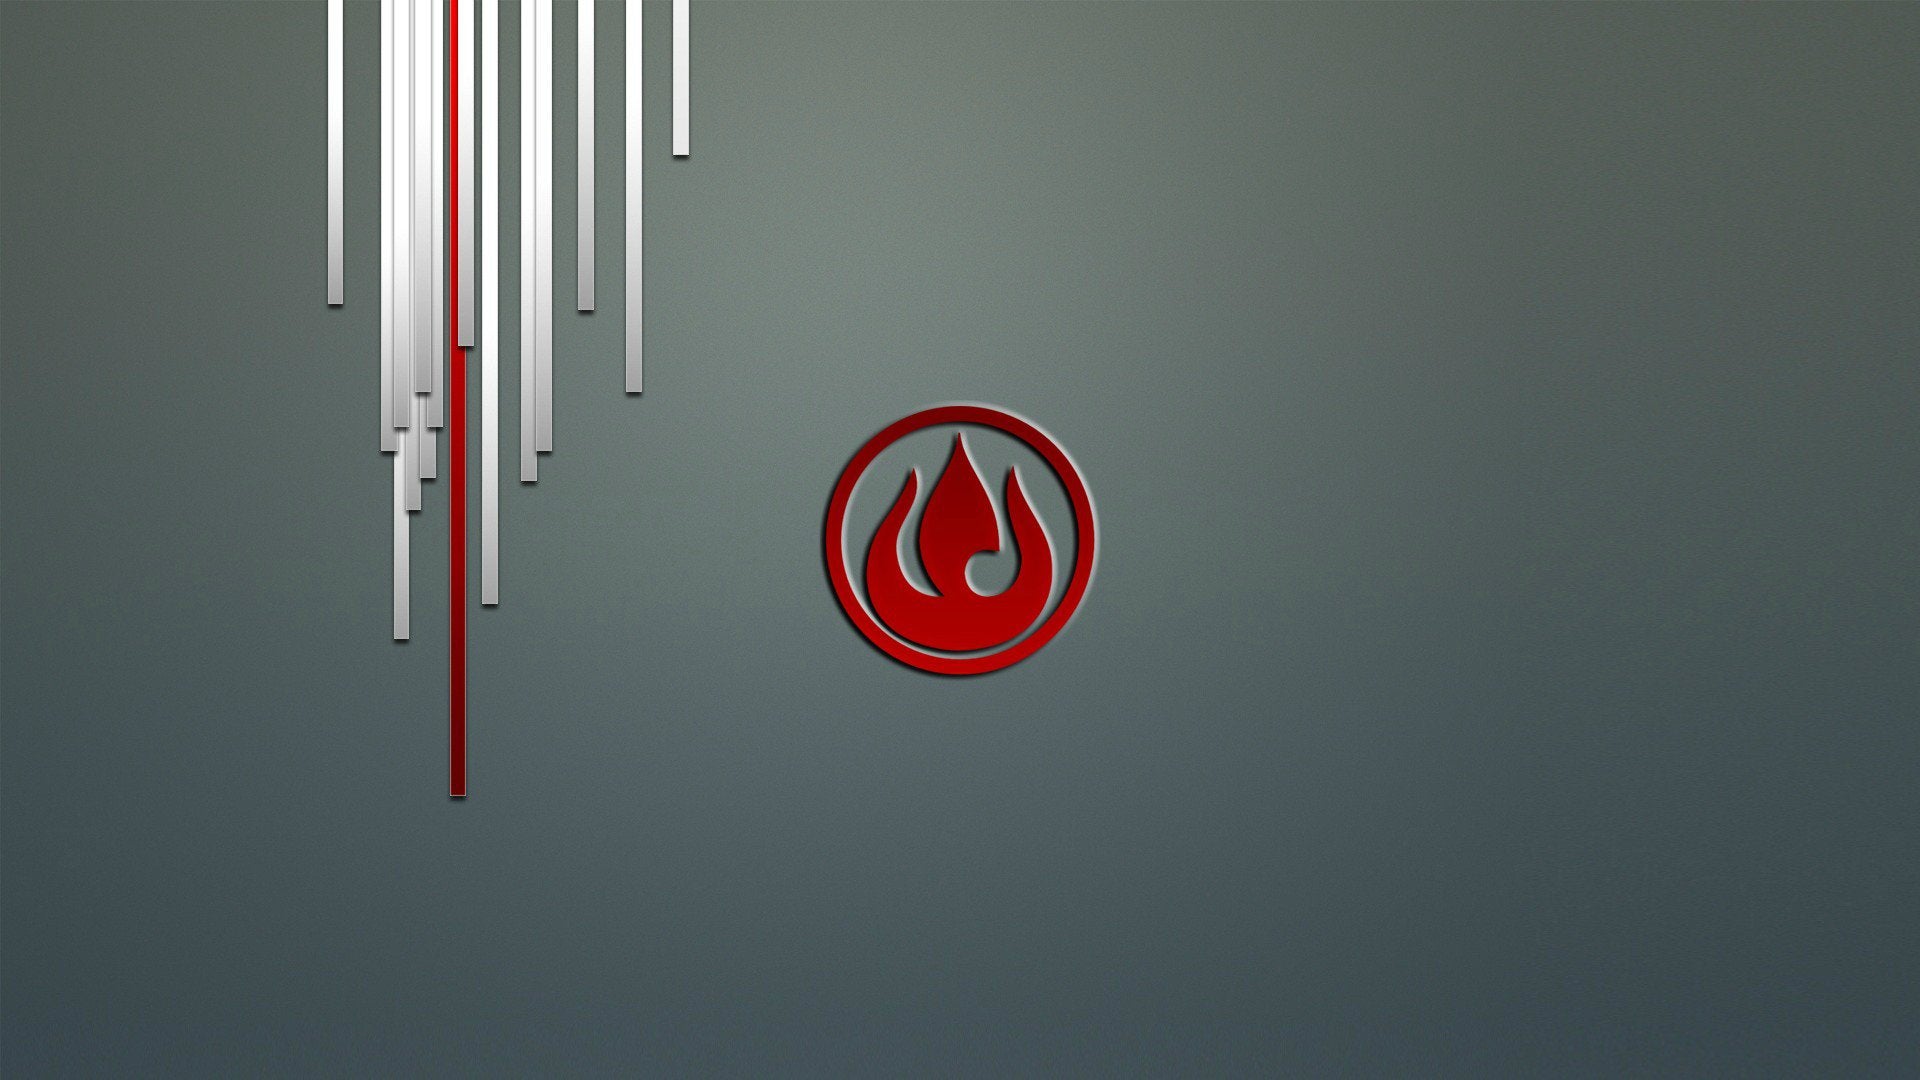 Just A Quick Fire Nation Wallpaper I Whipped Up. Download To Original Background Picture In Comments. [1920x1080](x Post From R Thelastairbender)